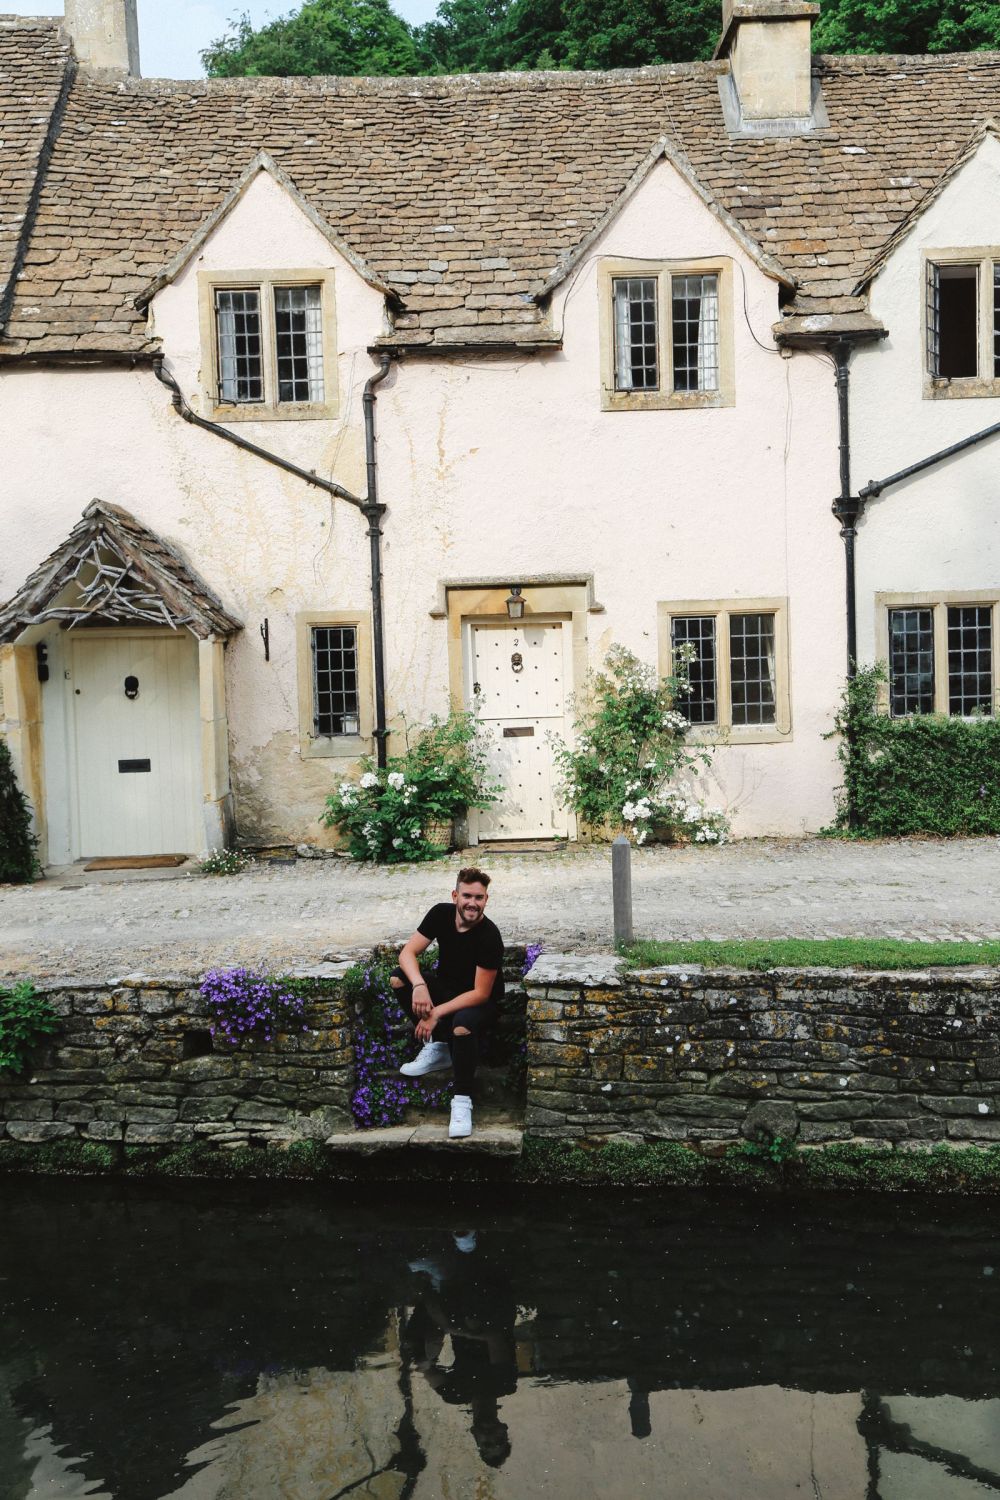 Exploring One Of England's Most Beautiful Villages - Castle Combe (26)